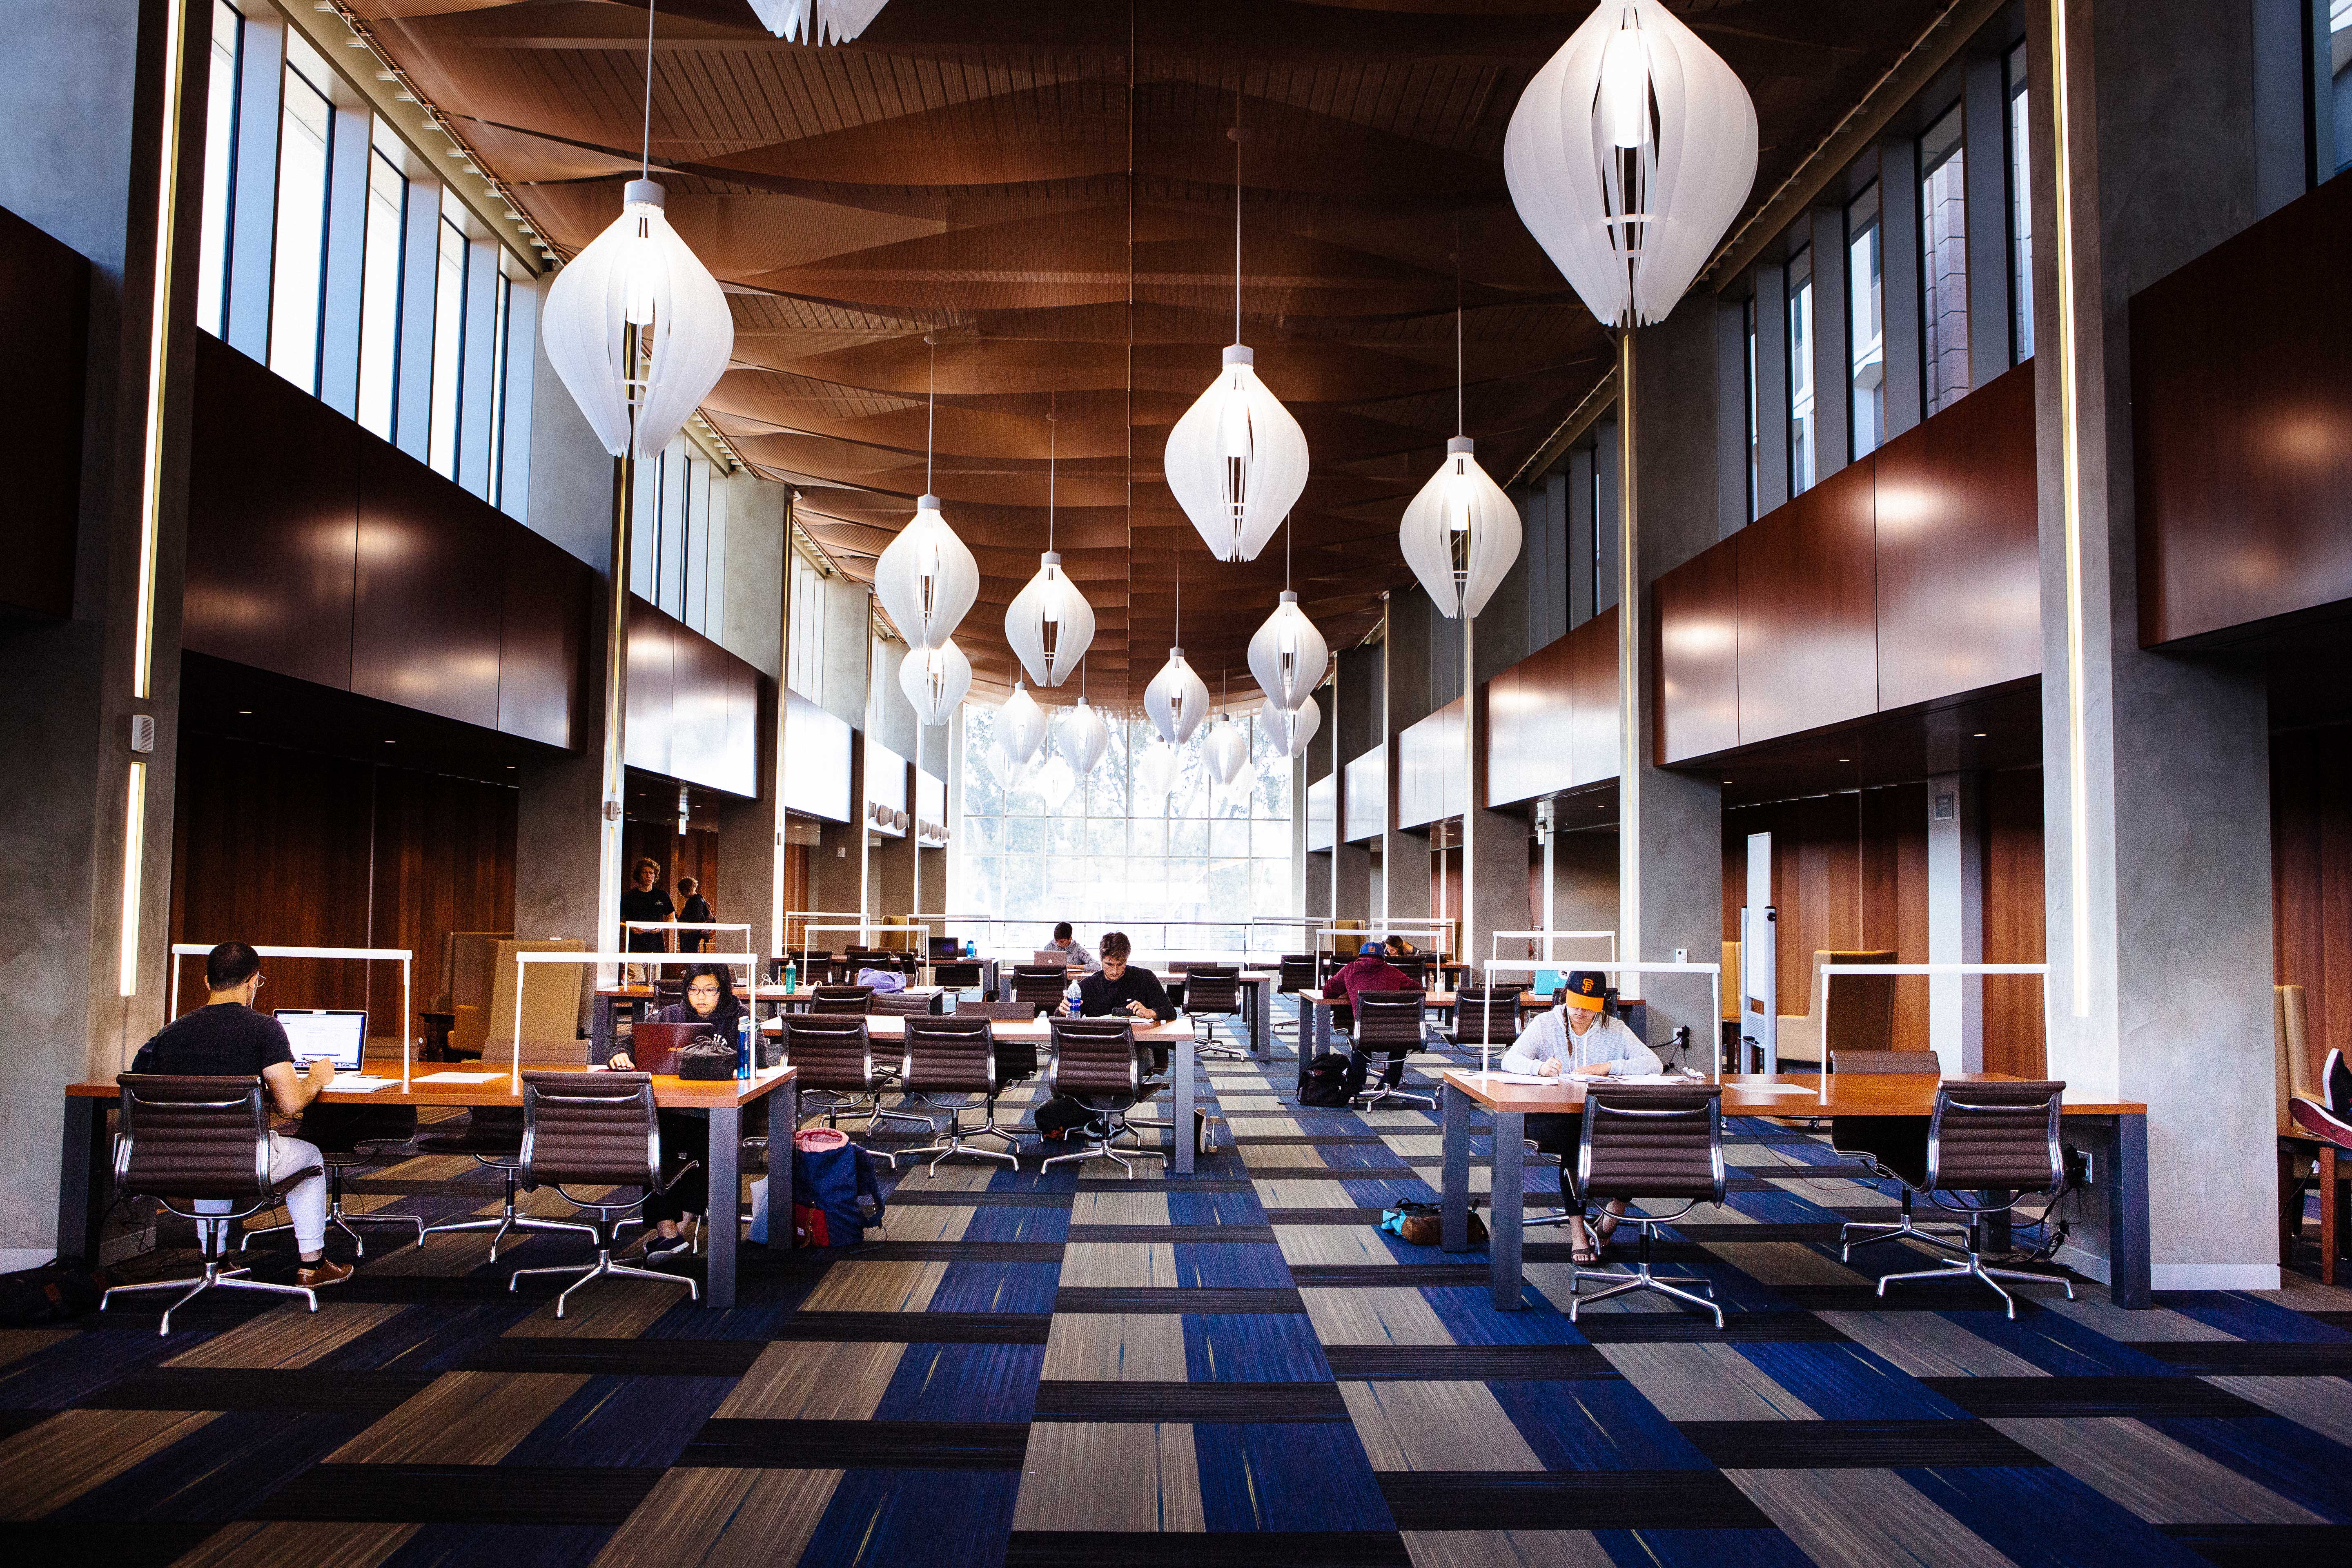 UCSB Library interior